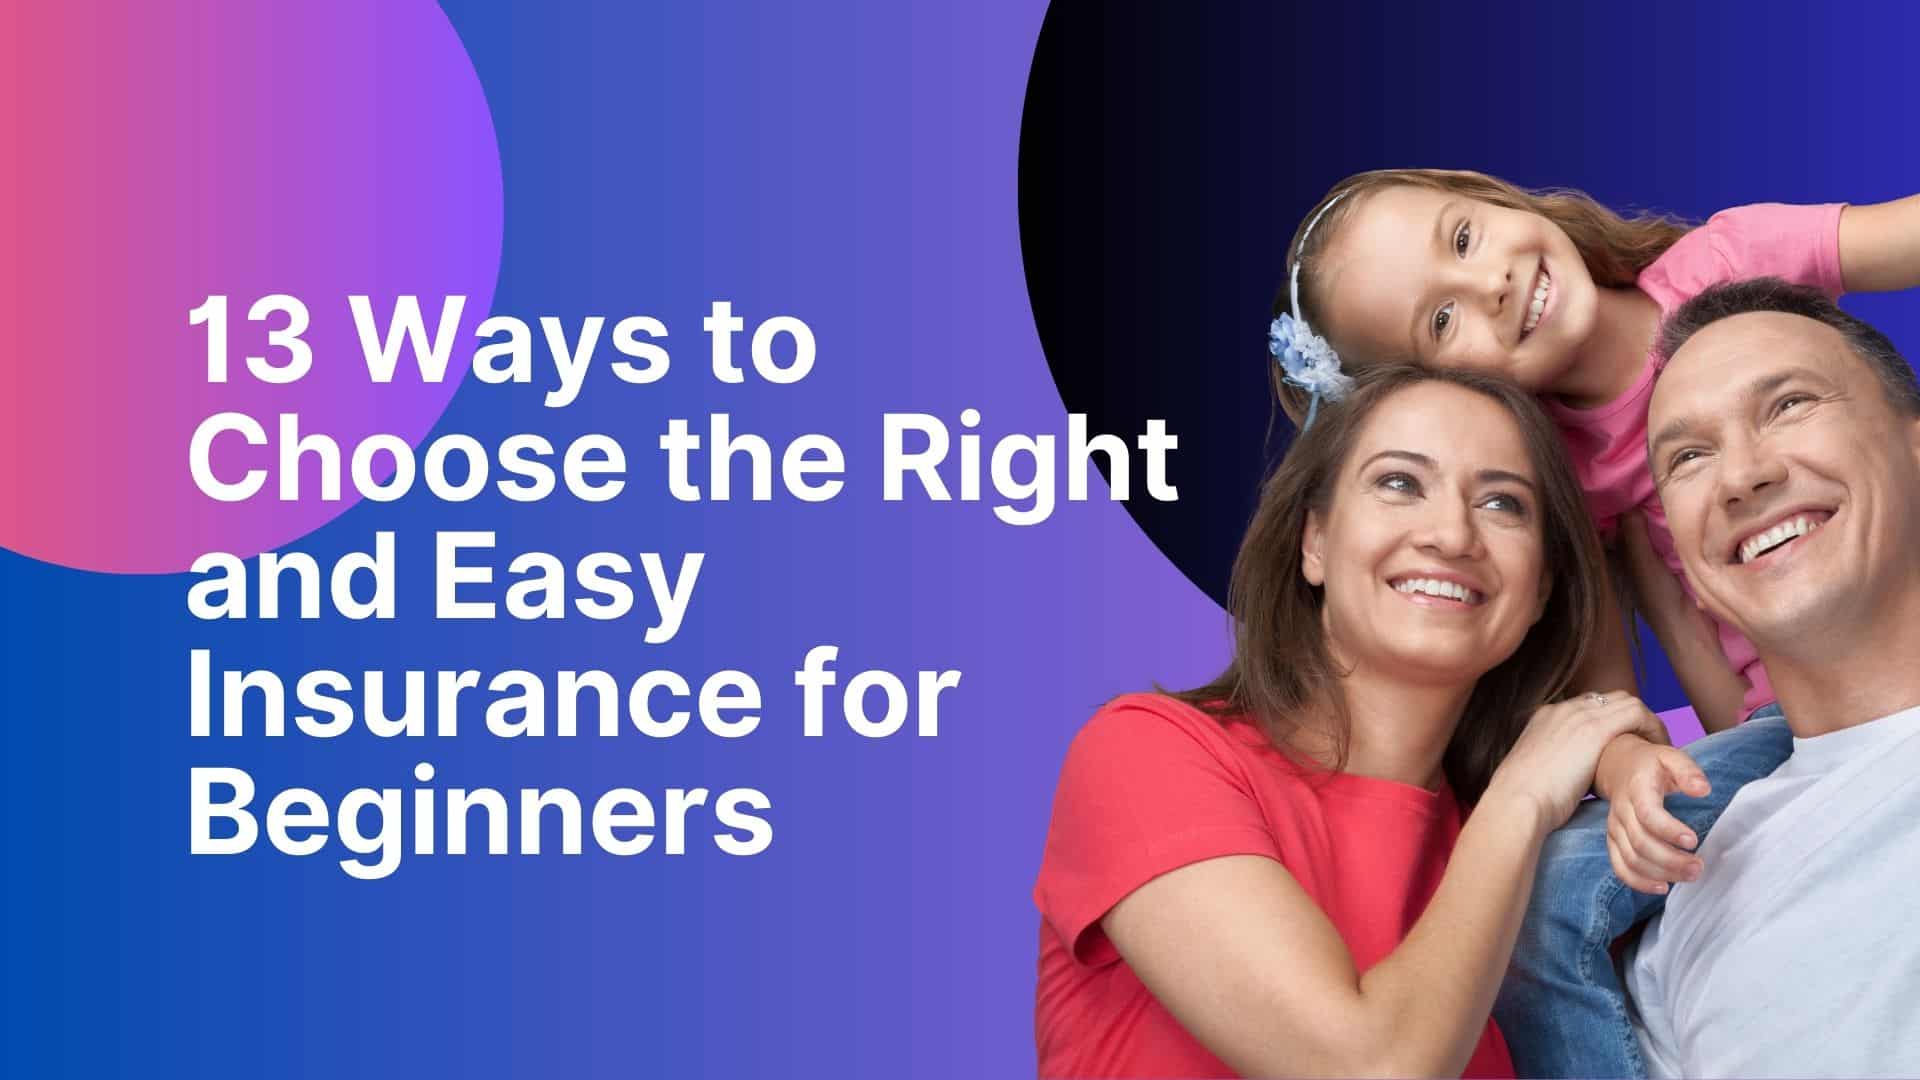 13 Ways to Choose the Right and Easy Insurance for Beginners